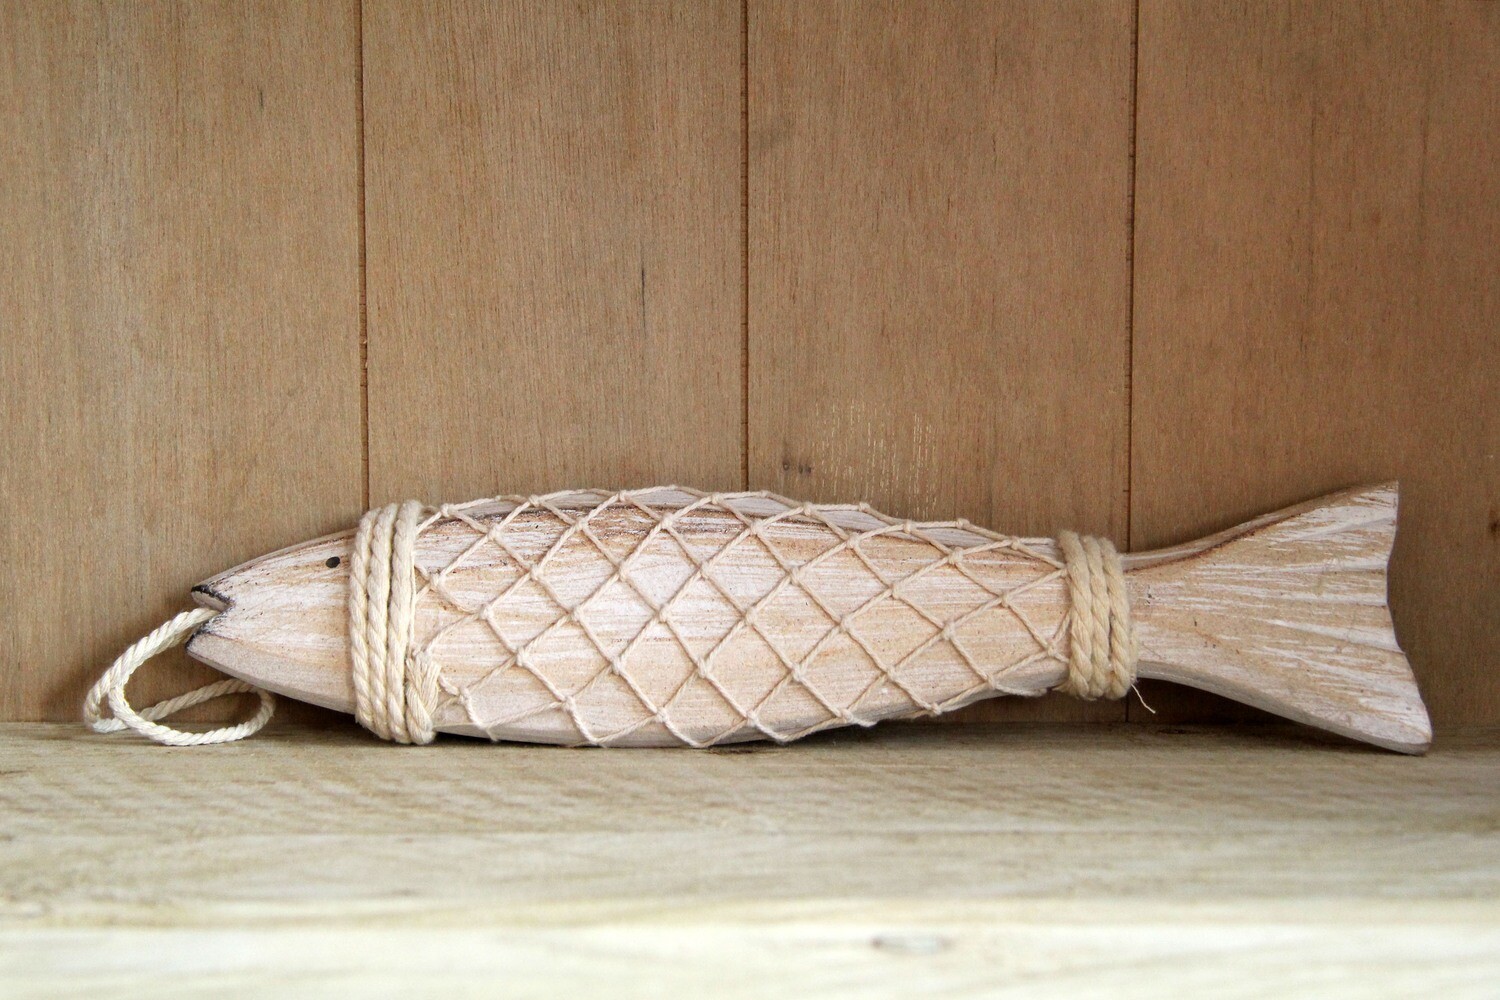 Wooden netted fish (large)